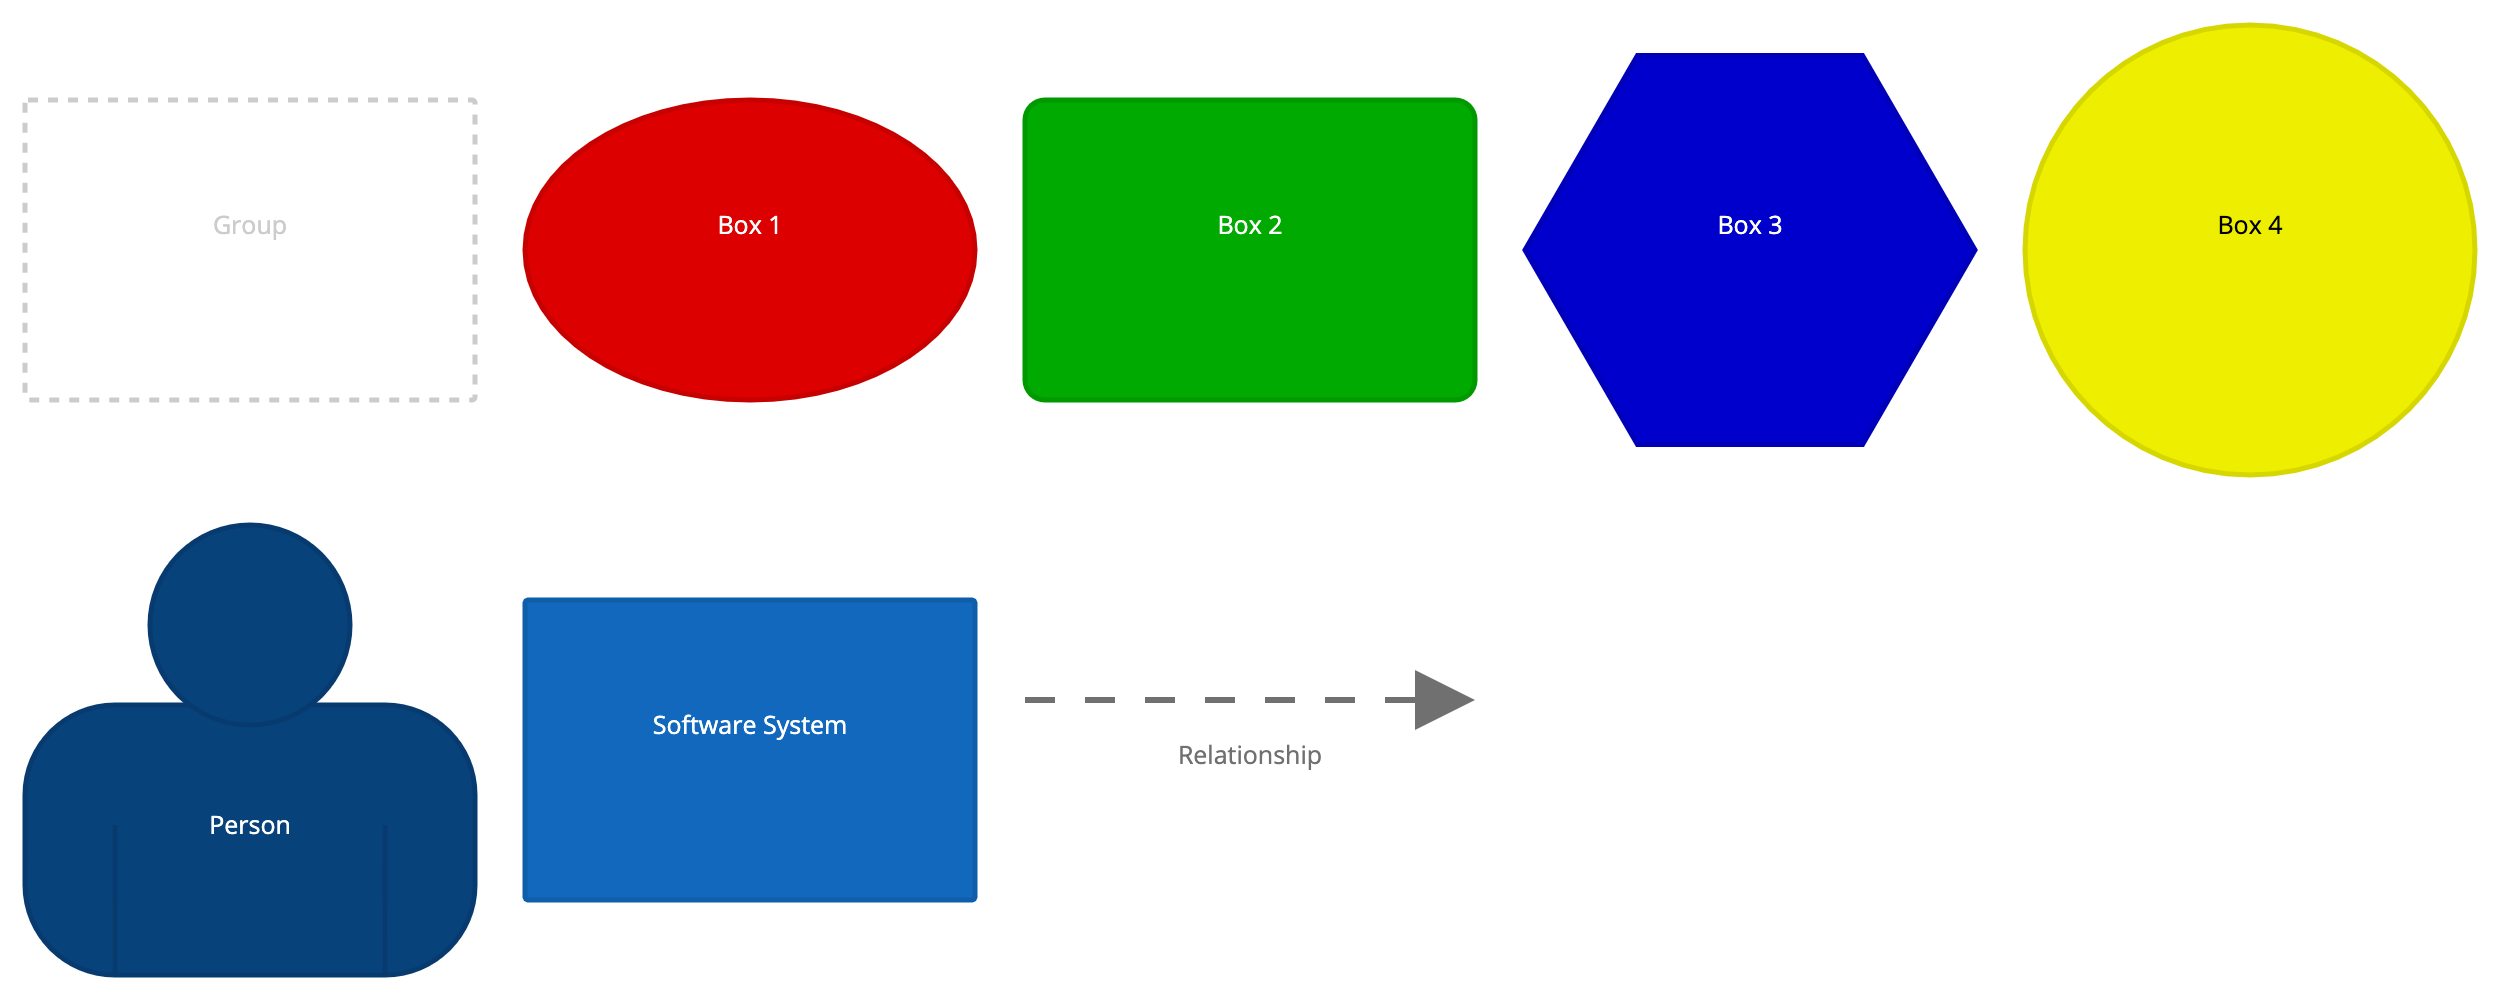 Diagram key/legend for system context diagram with additional custom elements